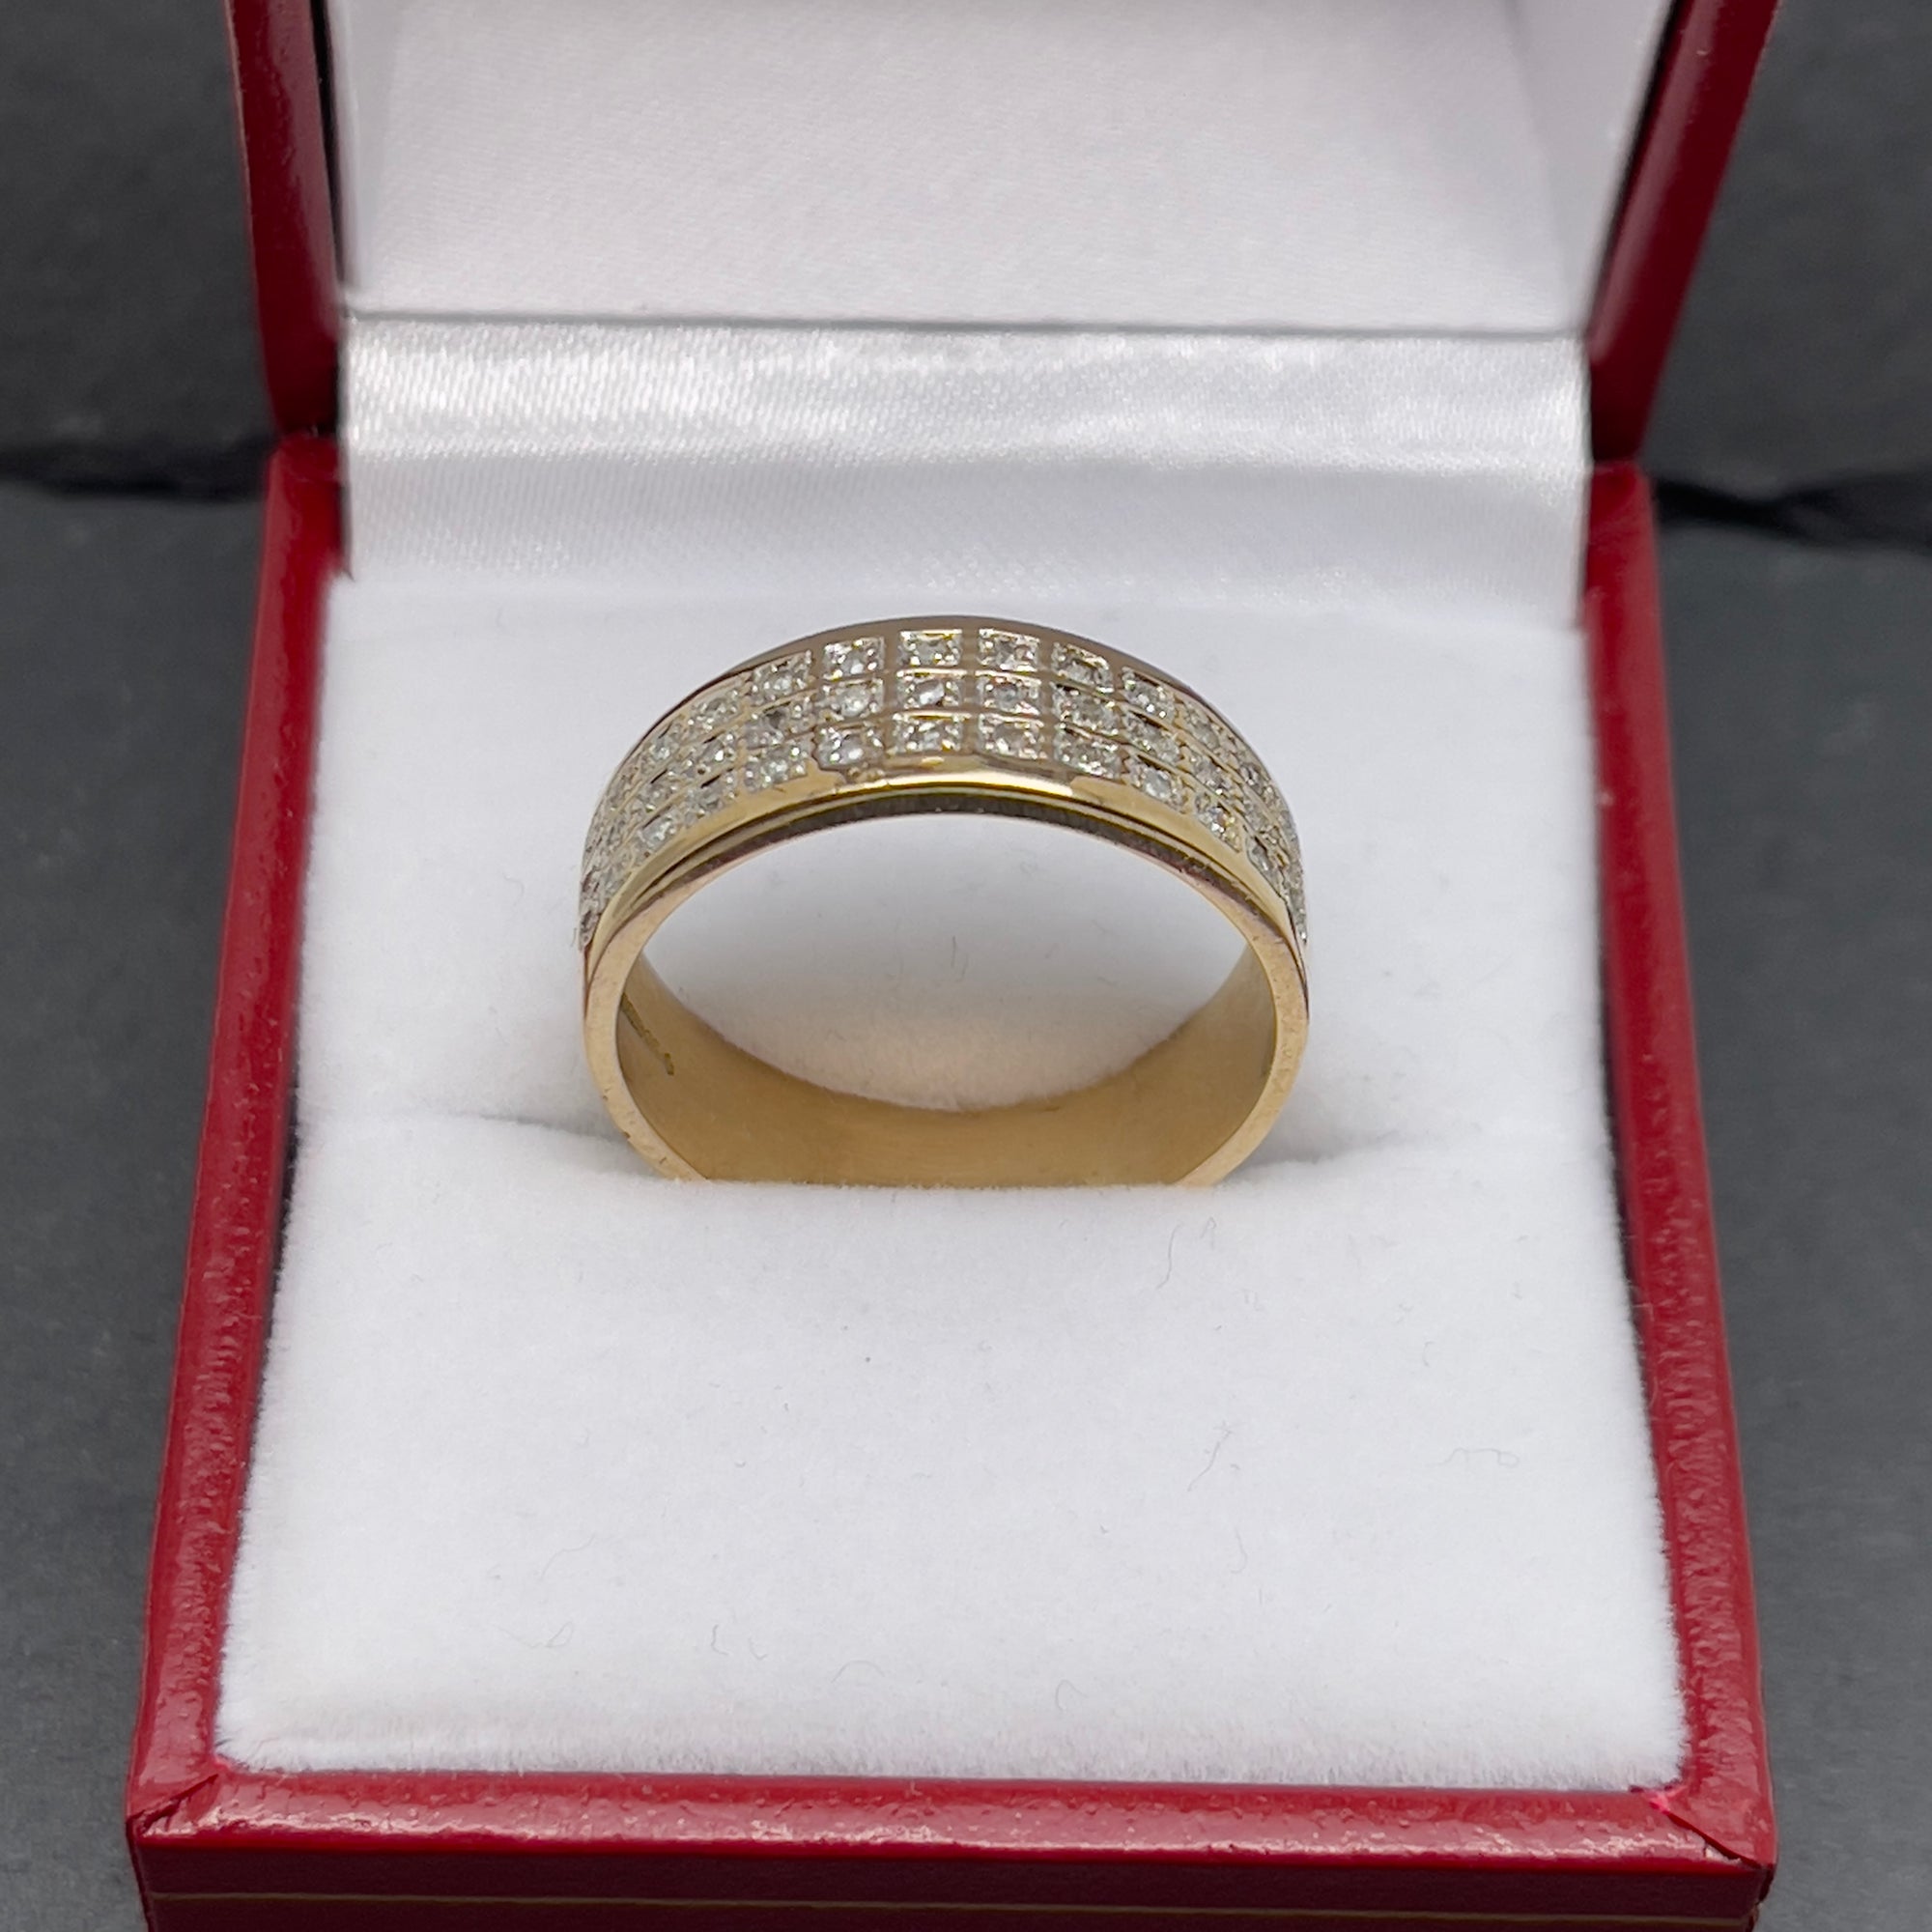 9 diamond ring for men's made in 18kt gold design and price - YouTube